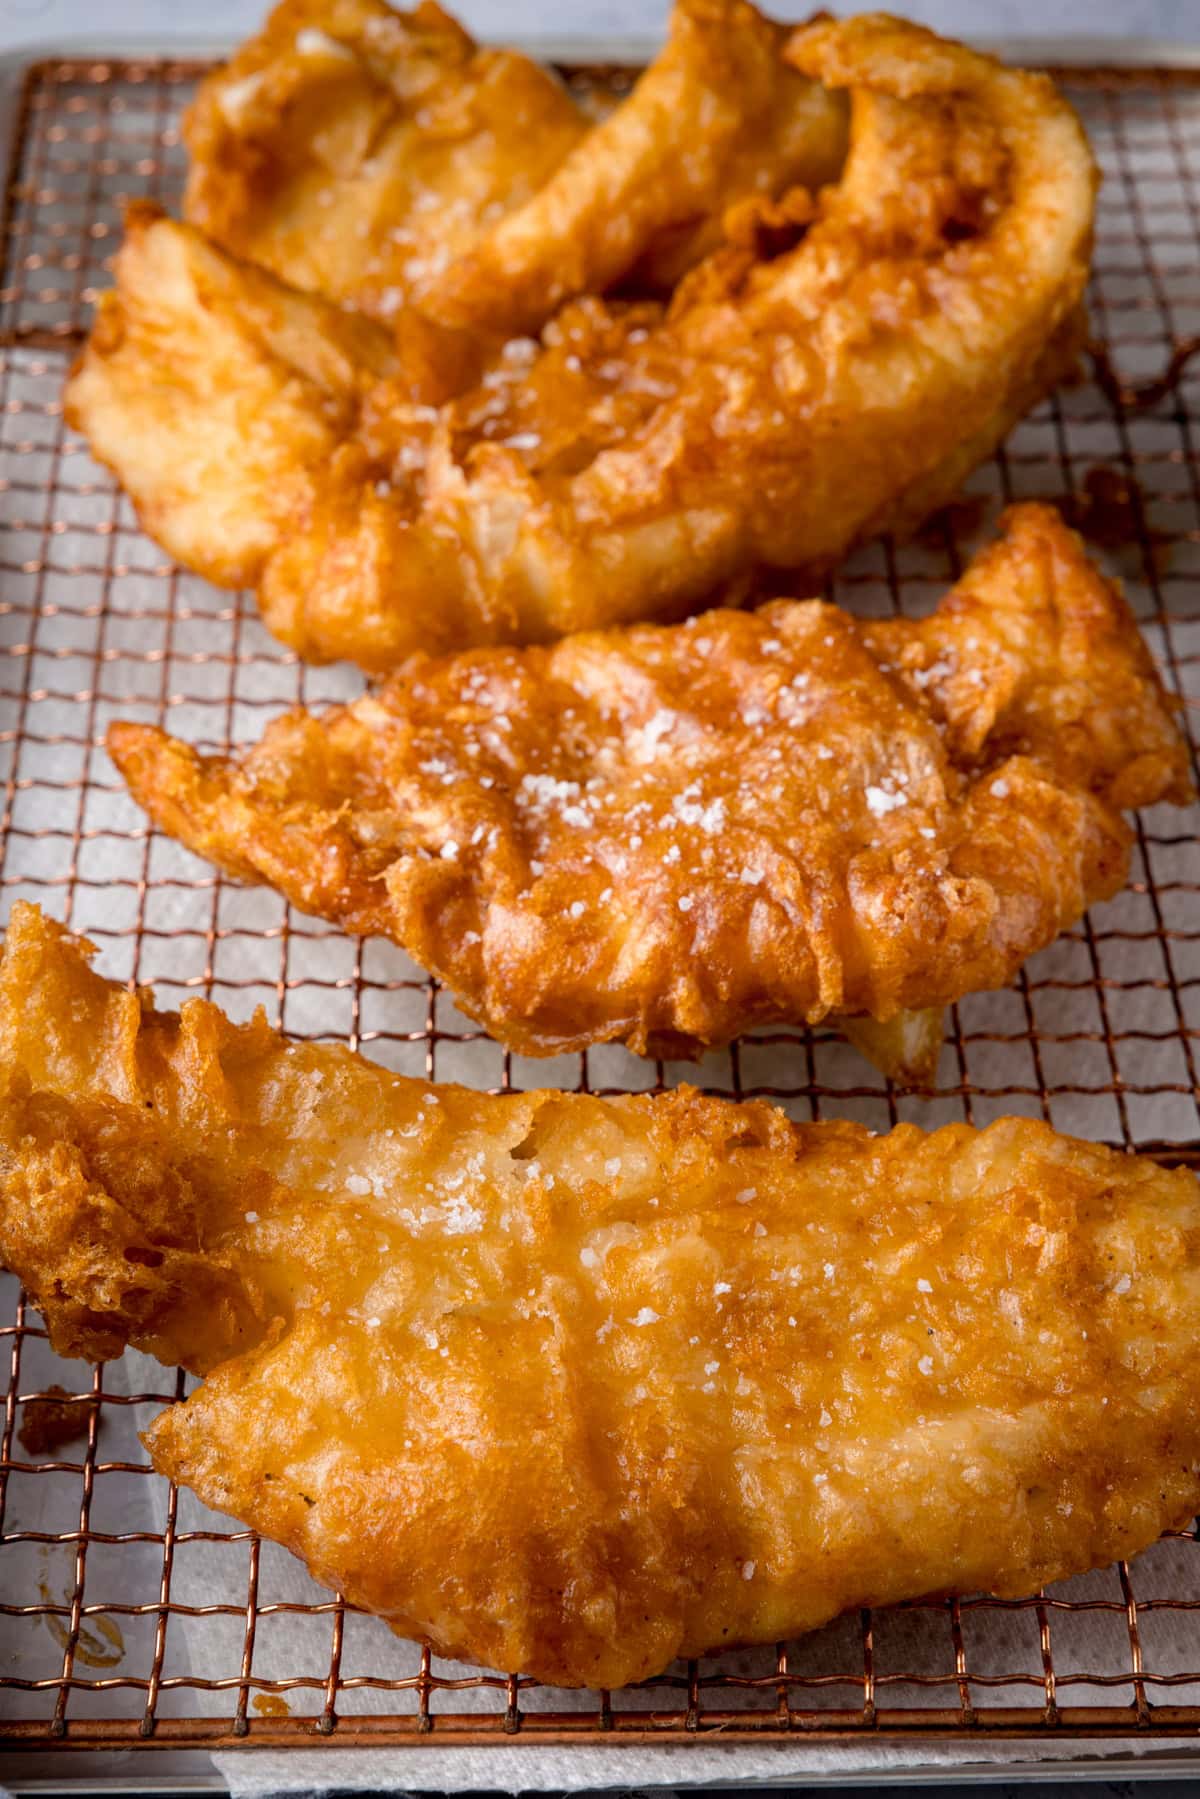 A tall shot of three fish fillets, battered in the beer batter. There are three golden battered fish fillets laid side by side on a copper wire rack. They are topped with flakes of salt. The wire rack is on a white marble background.